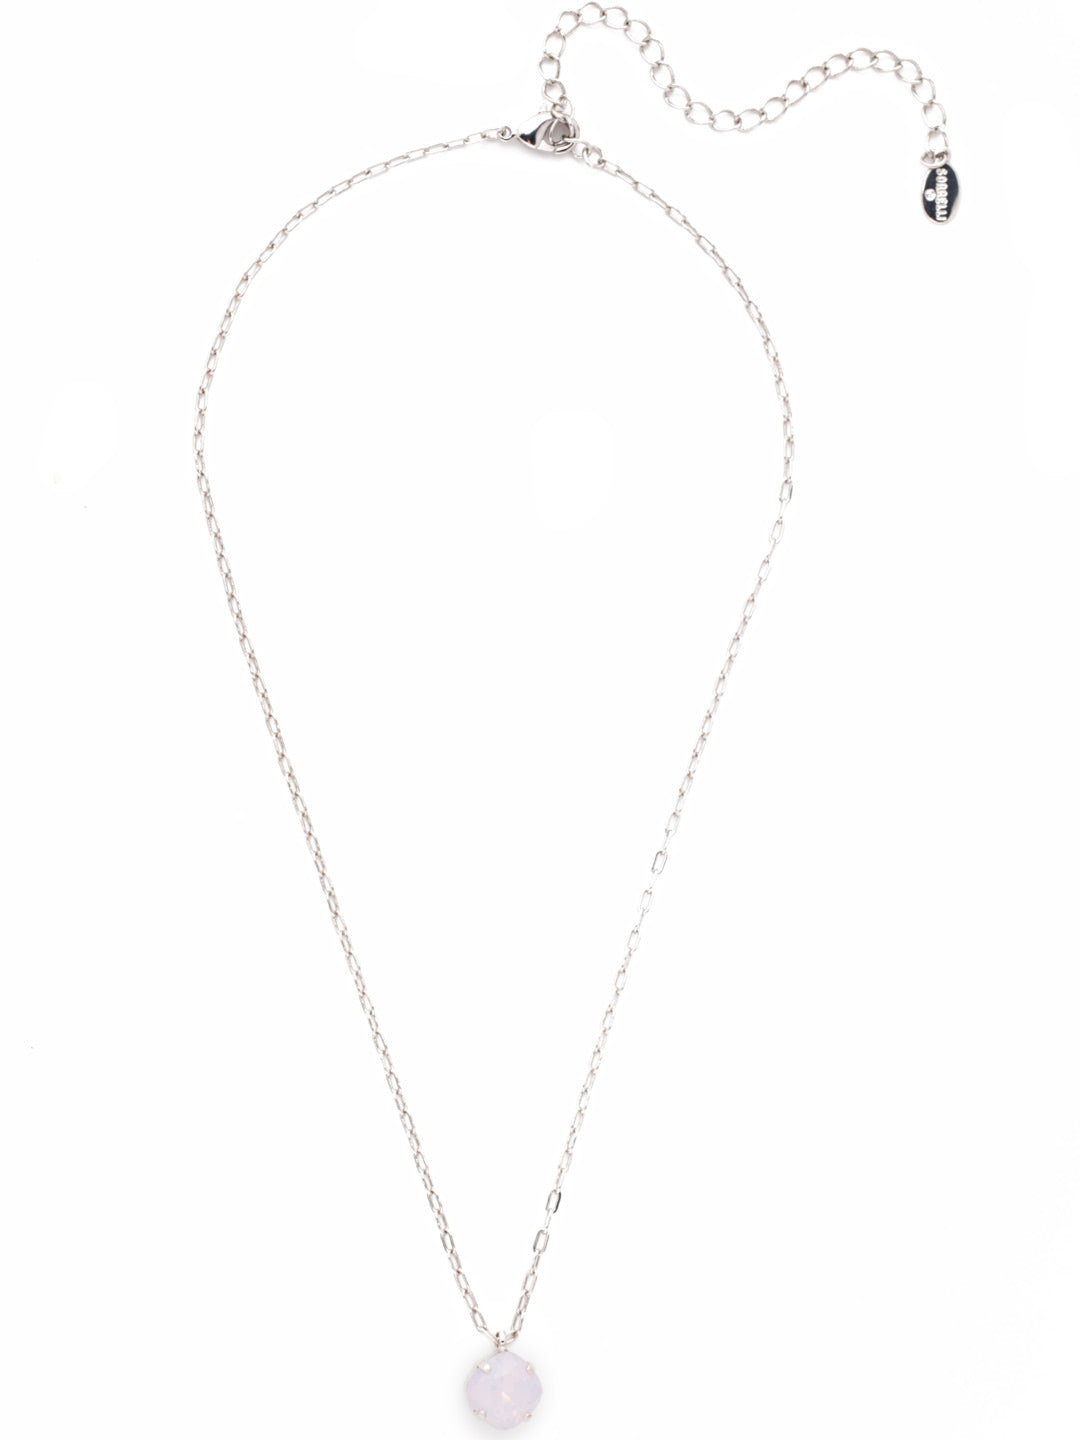 Siren Pendant Necklace - NEP22RHROW - <p>With a cushion-cut crystal and delicate chain, the Siren Pendant  will add a litle sparkle to your everyday look. From Sorrelli's Rose Water collection in our Palladium Silver-tone finish.</p>